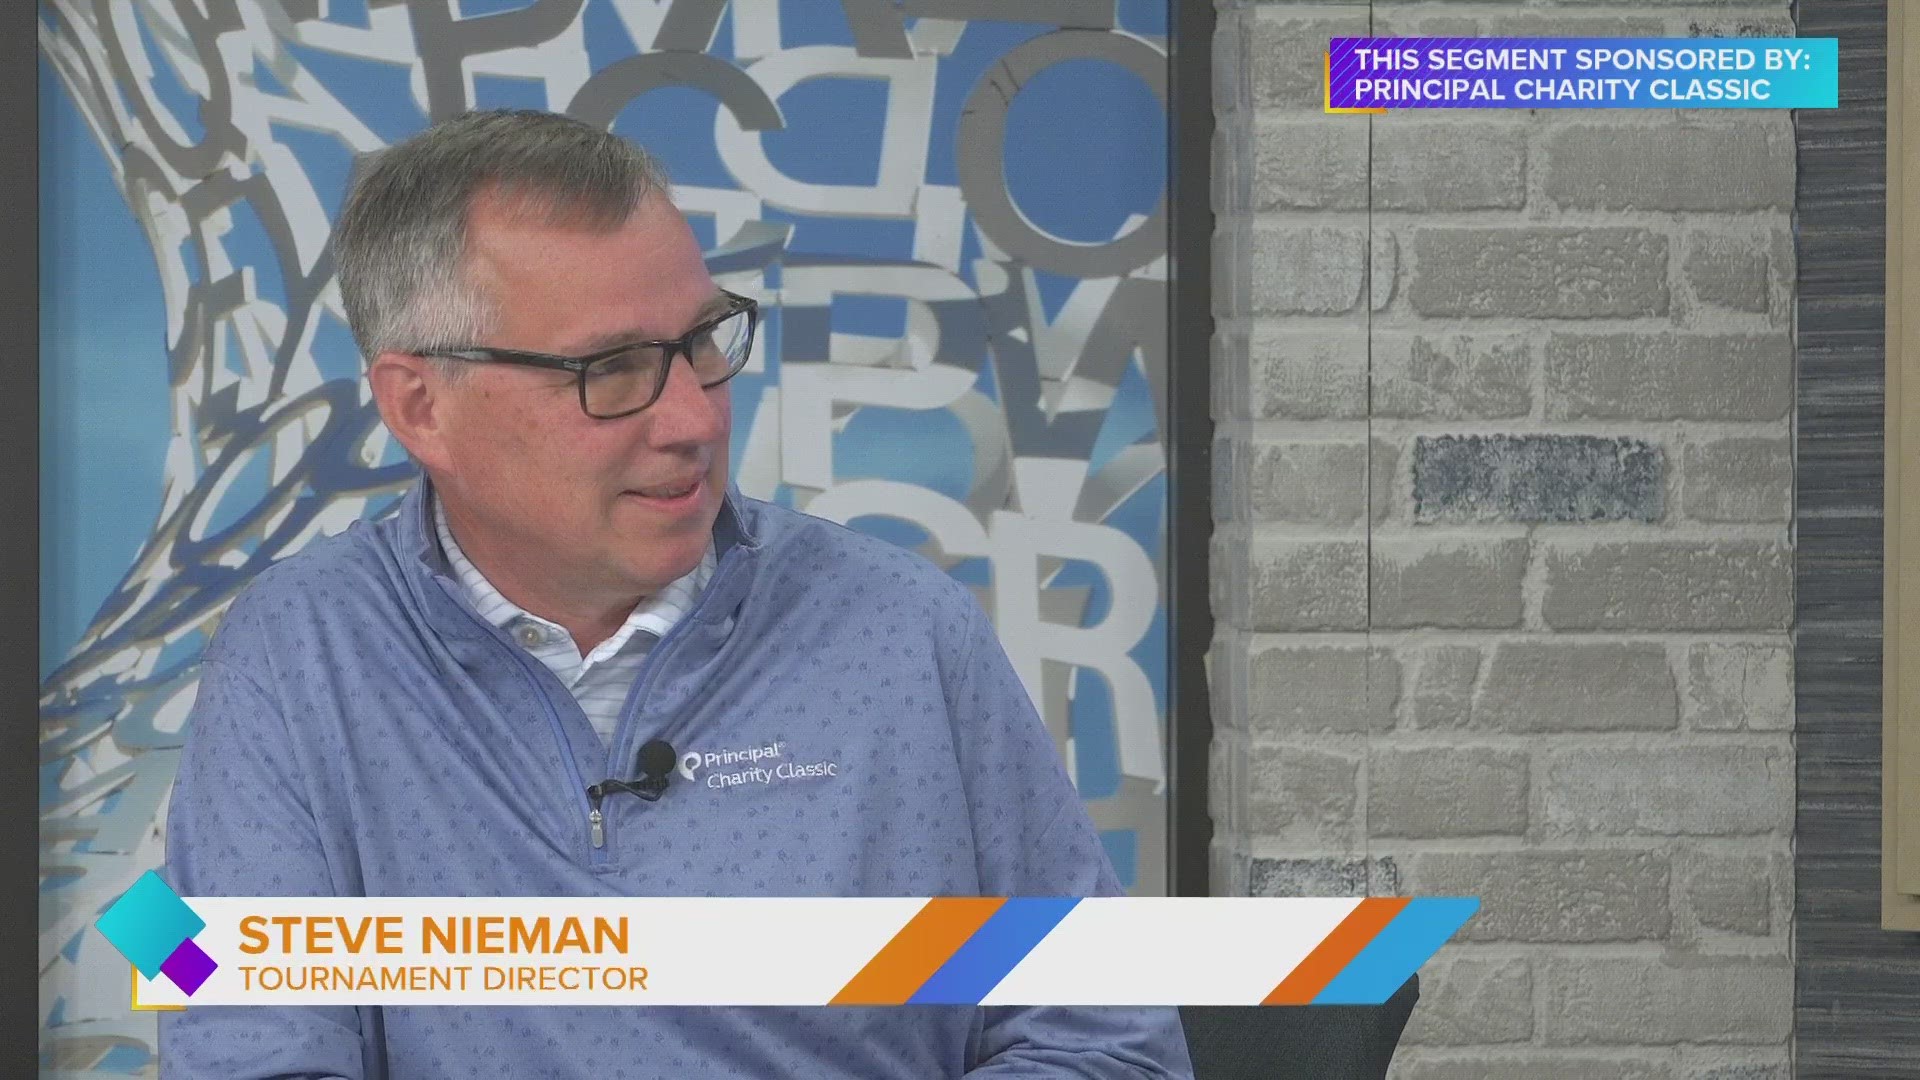 Steve Nieman, Tournament Director-Principal Charity Classic, has details about next week's activities & golf legends who will be playing in Des Moines | Paid Content